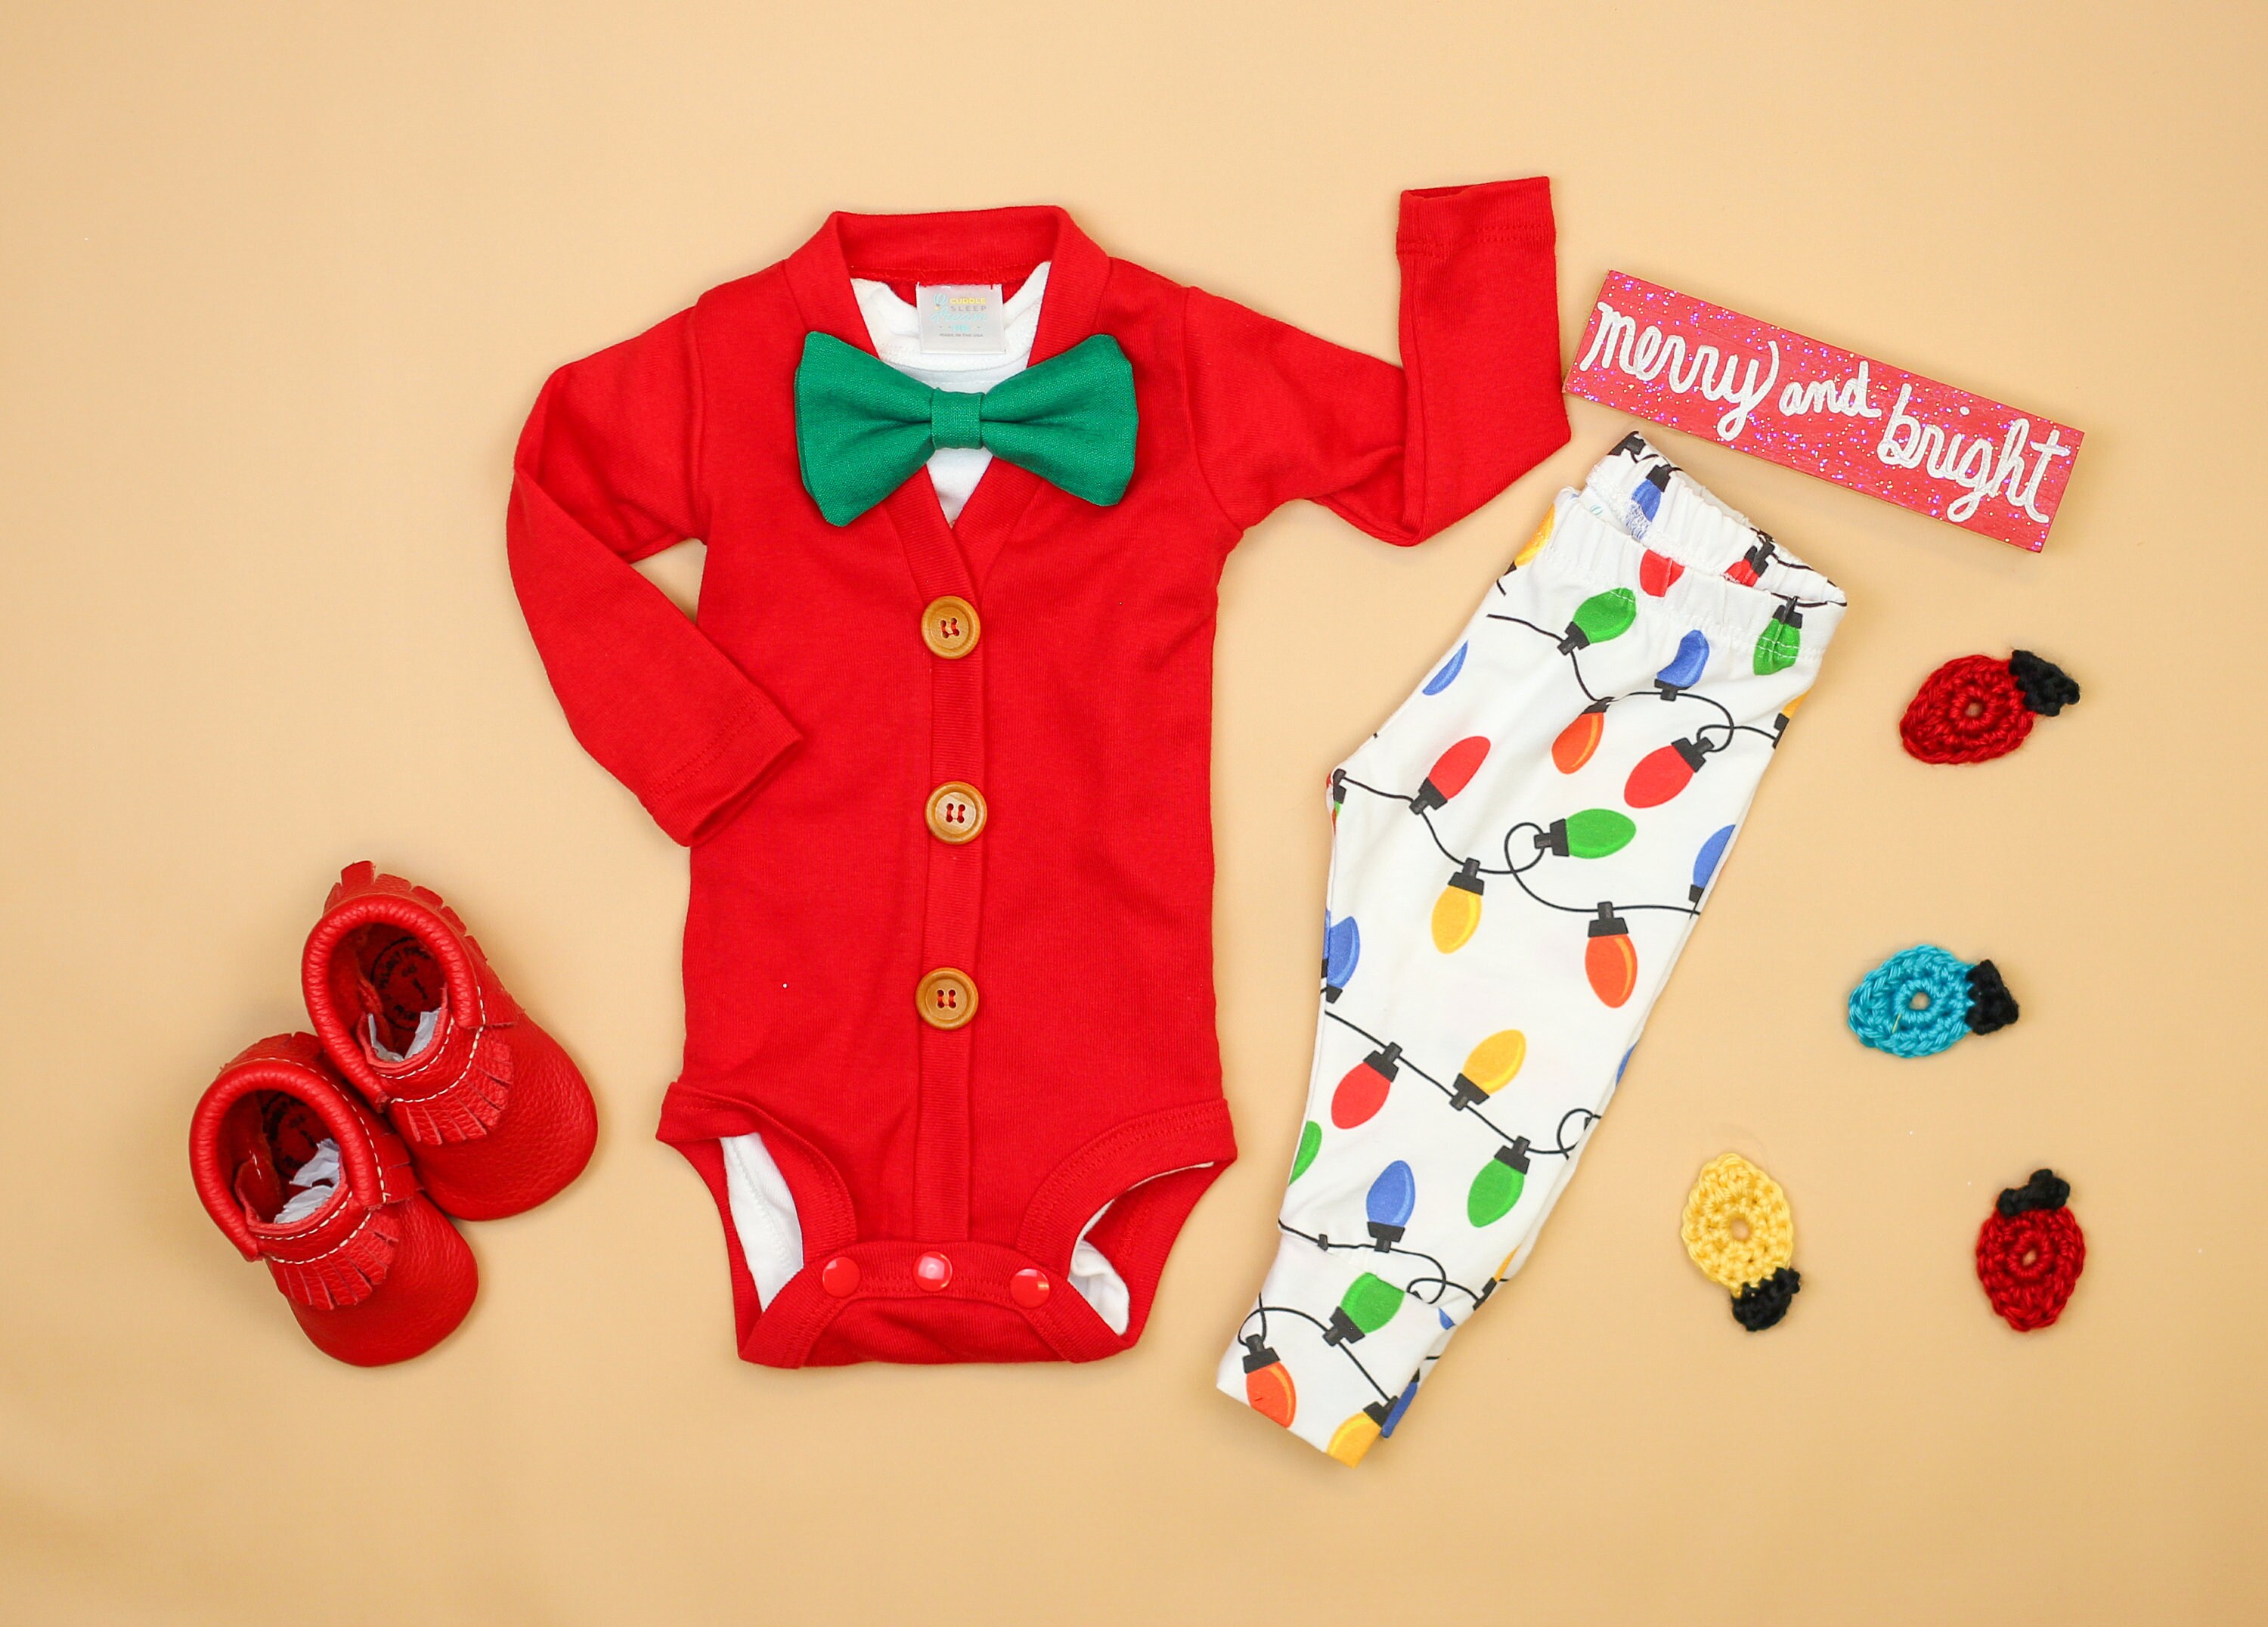 ONLY NEWBORN Left Baby Boy Christmas Outfit. Red Cardigan With - Etsy